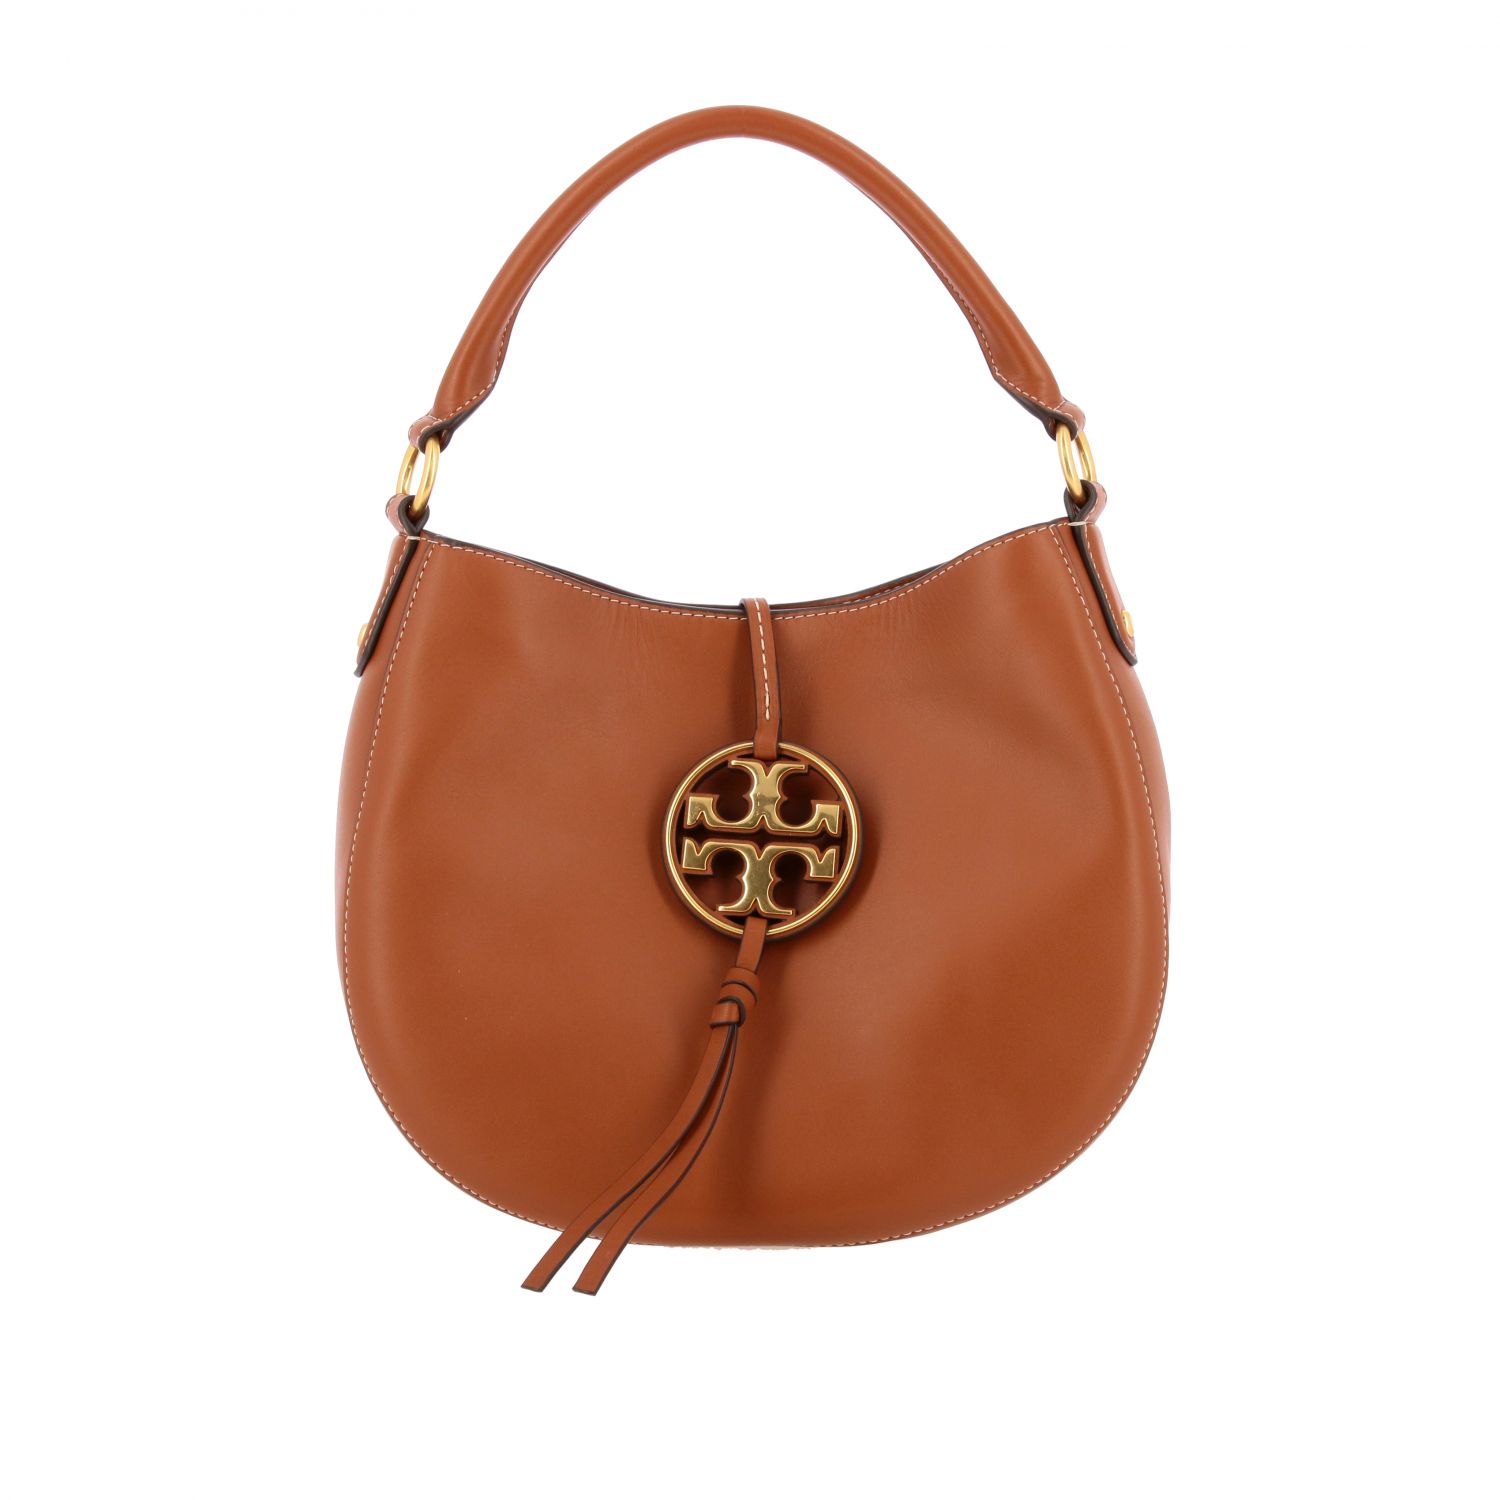 TORY BURCH: Miller mini hobo bag in smooth leather - Leather | Tory Burch  shoulder bag 59698 online on 